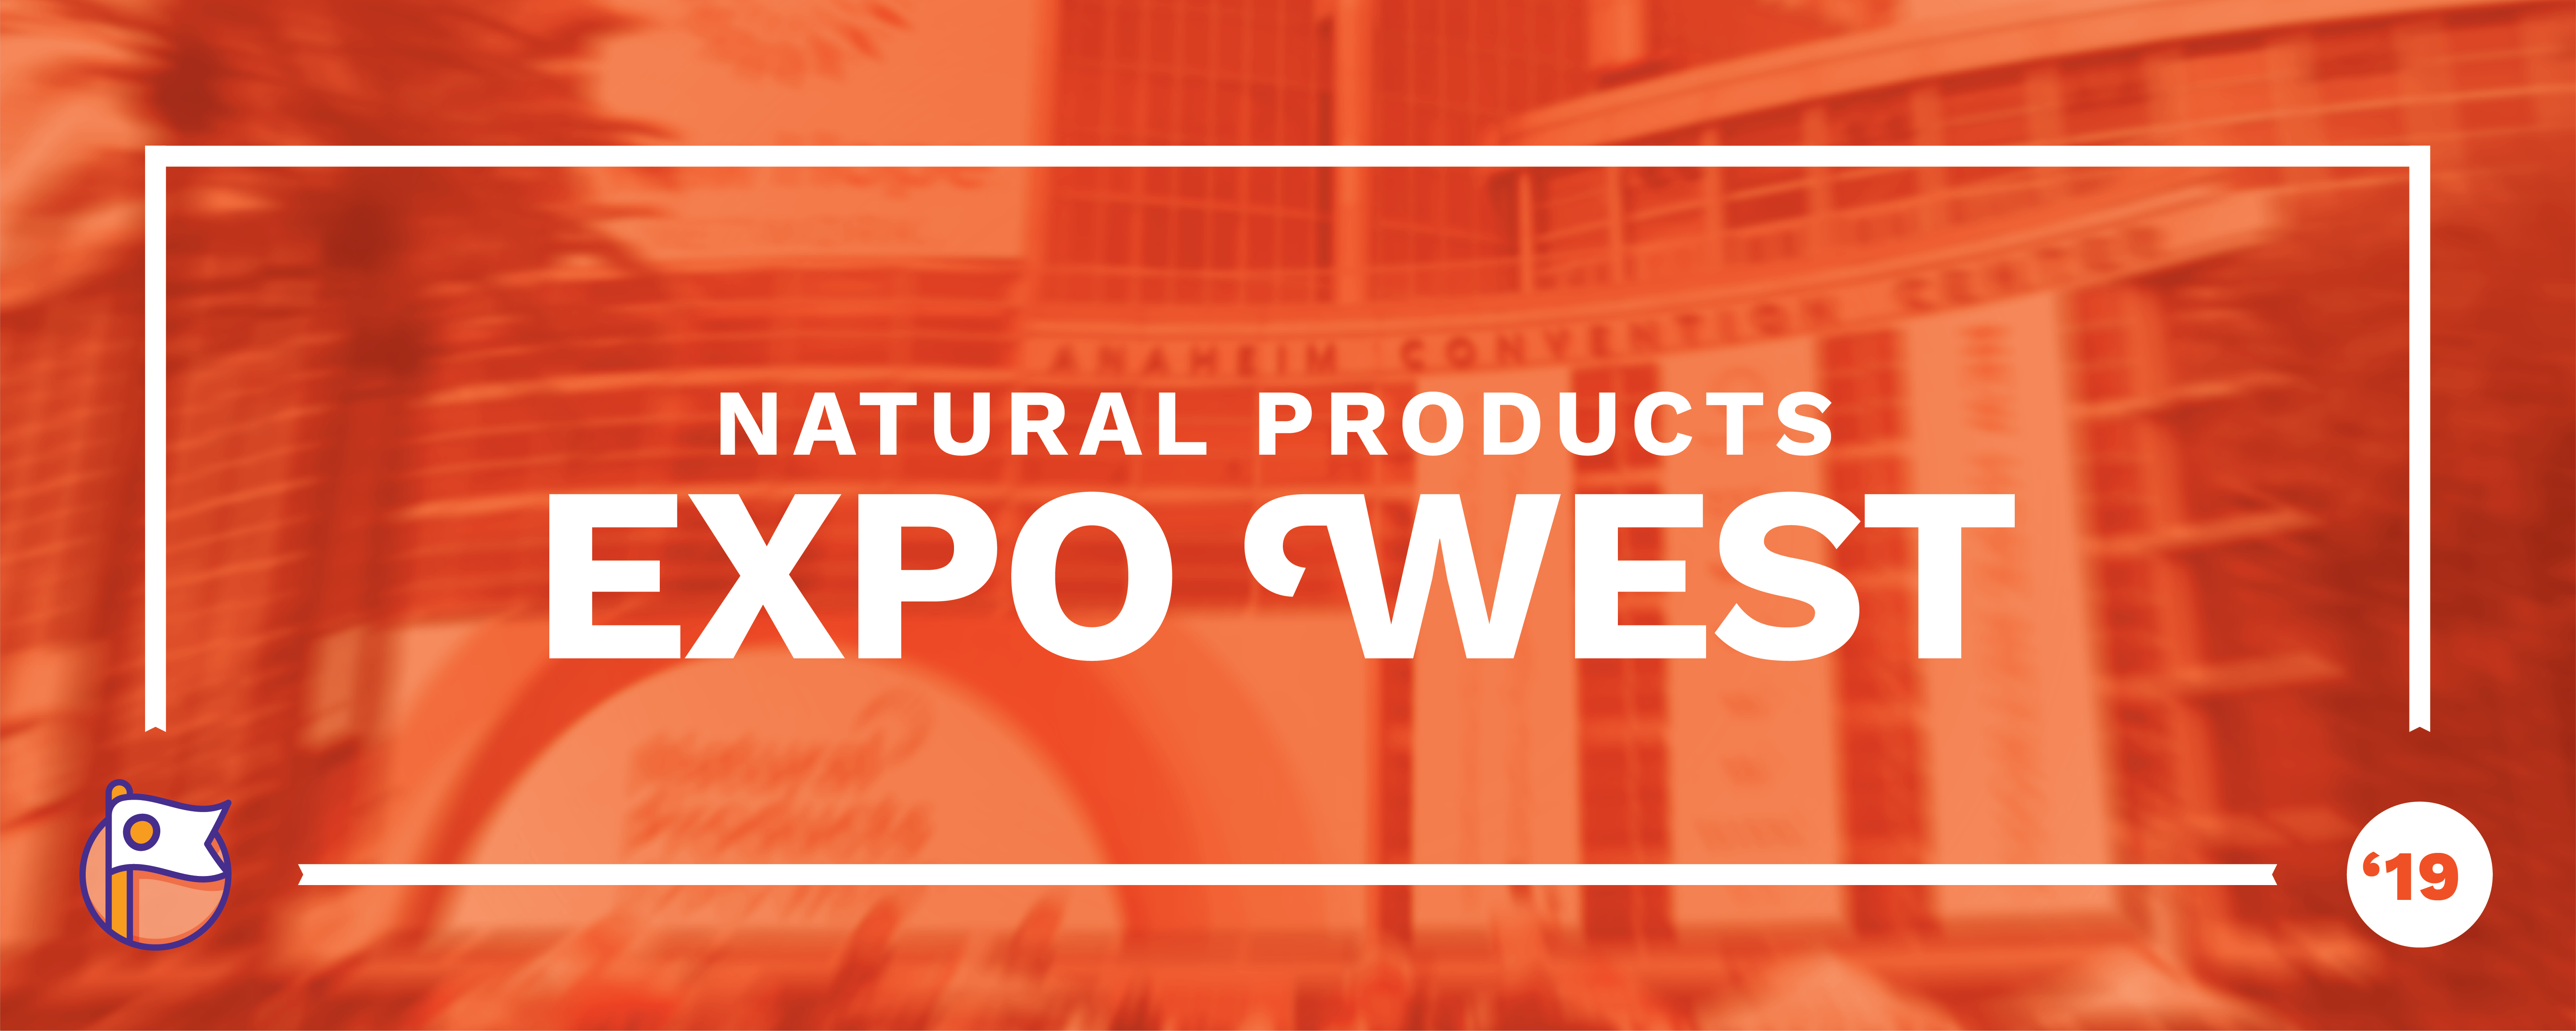 Expo West 2019 Brandfirst